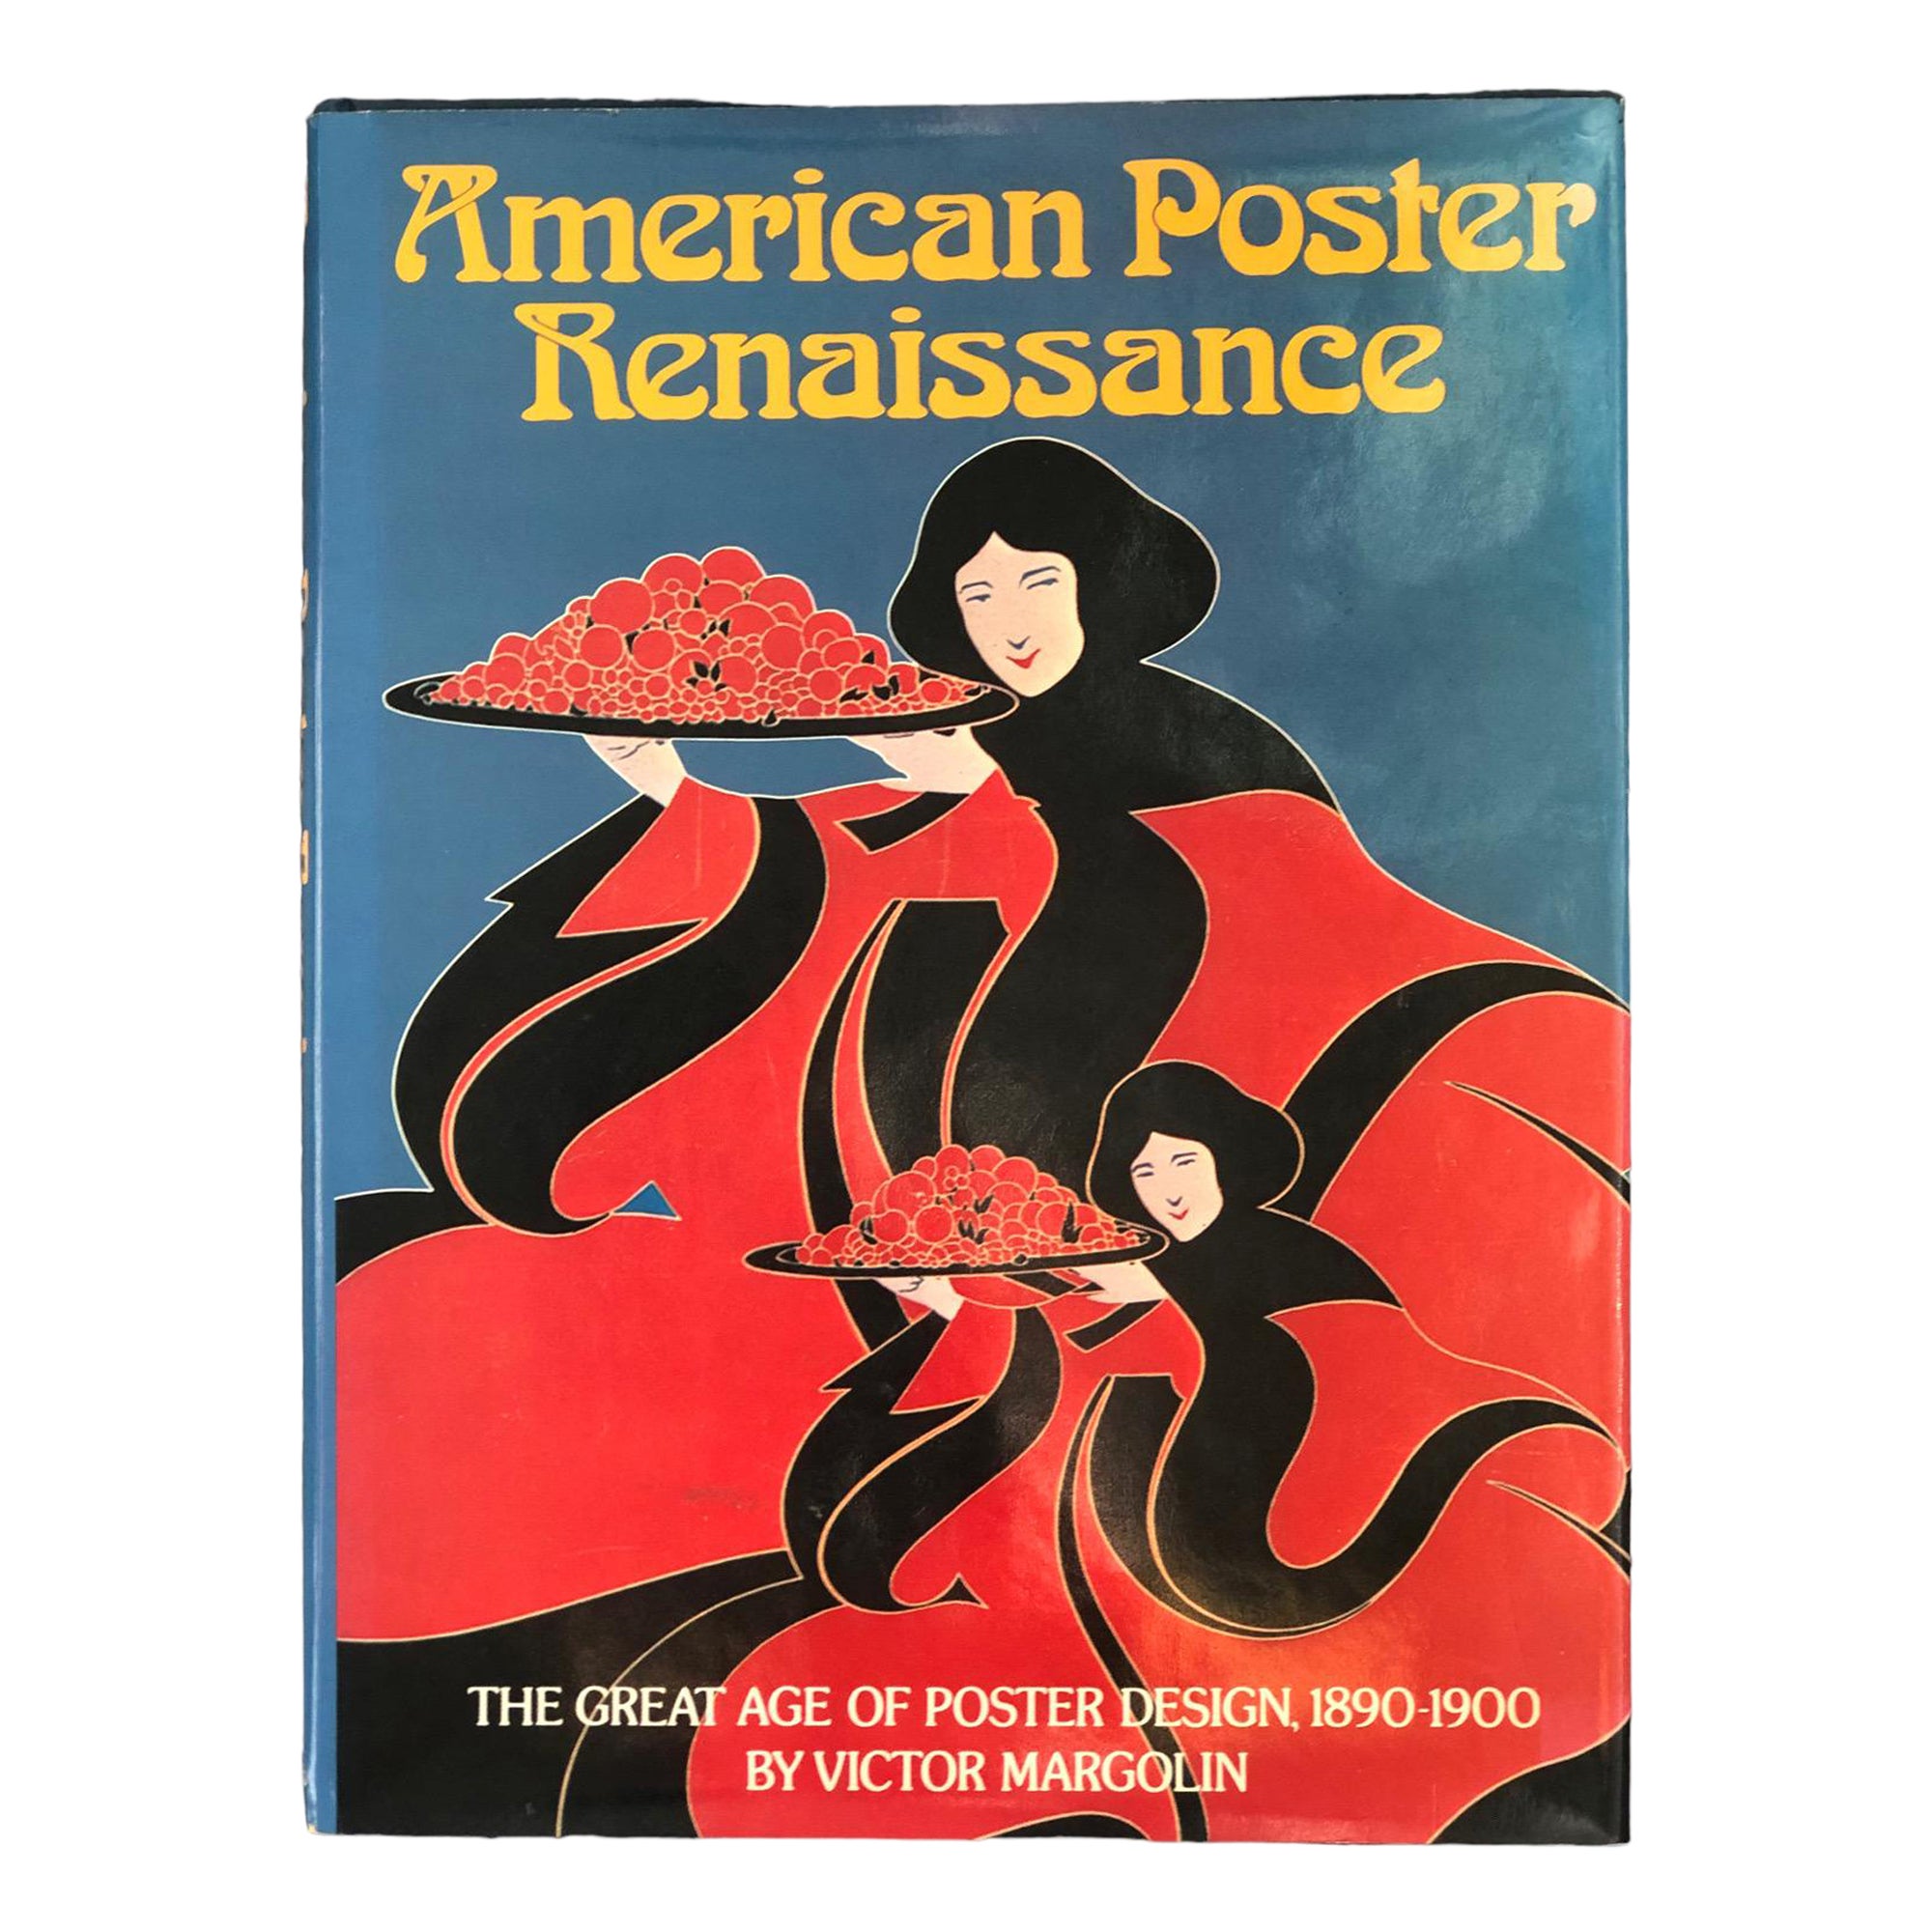 American Poster Renaissance 1890-1900 by Victor Margolin